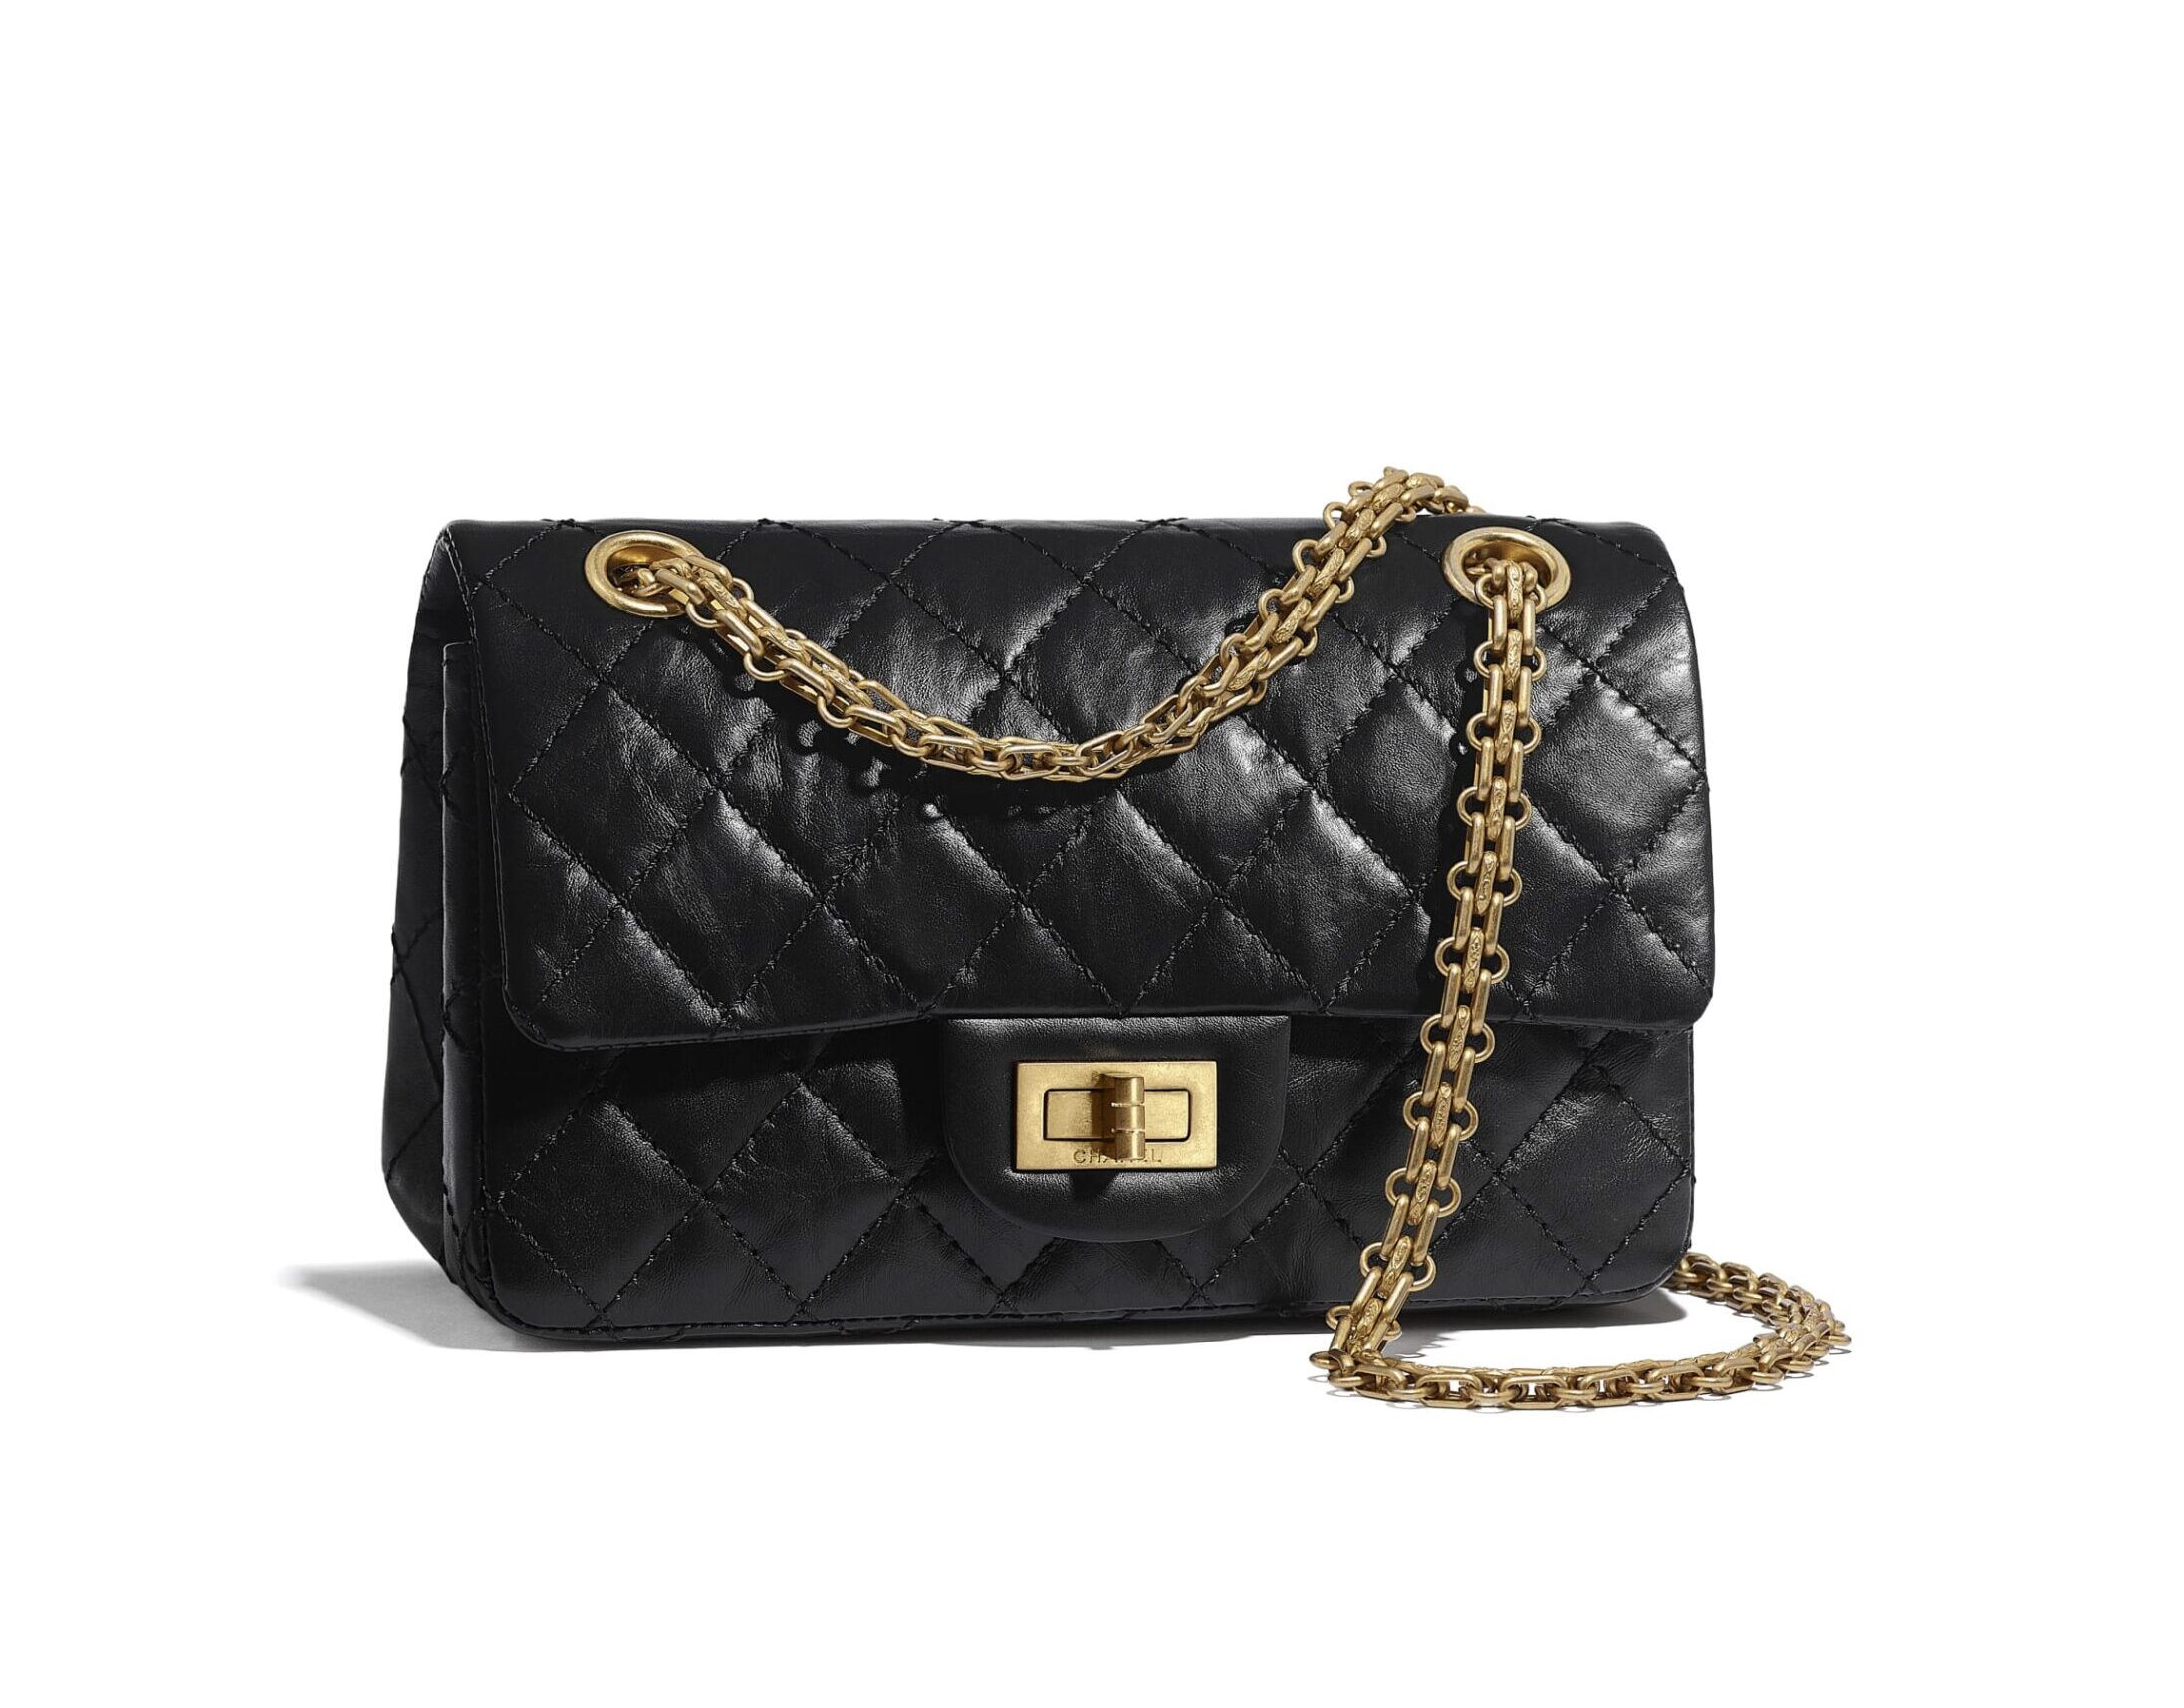 Chanel Black Quilted Mini Reissue 2.55 Flap Bag of Aged Calfksin Leather  with Gold Tone Hardware, Handbags & Accessories Online, Ecommerce Retail